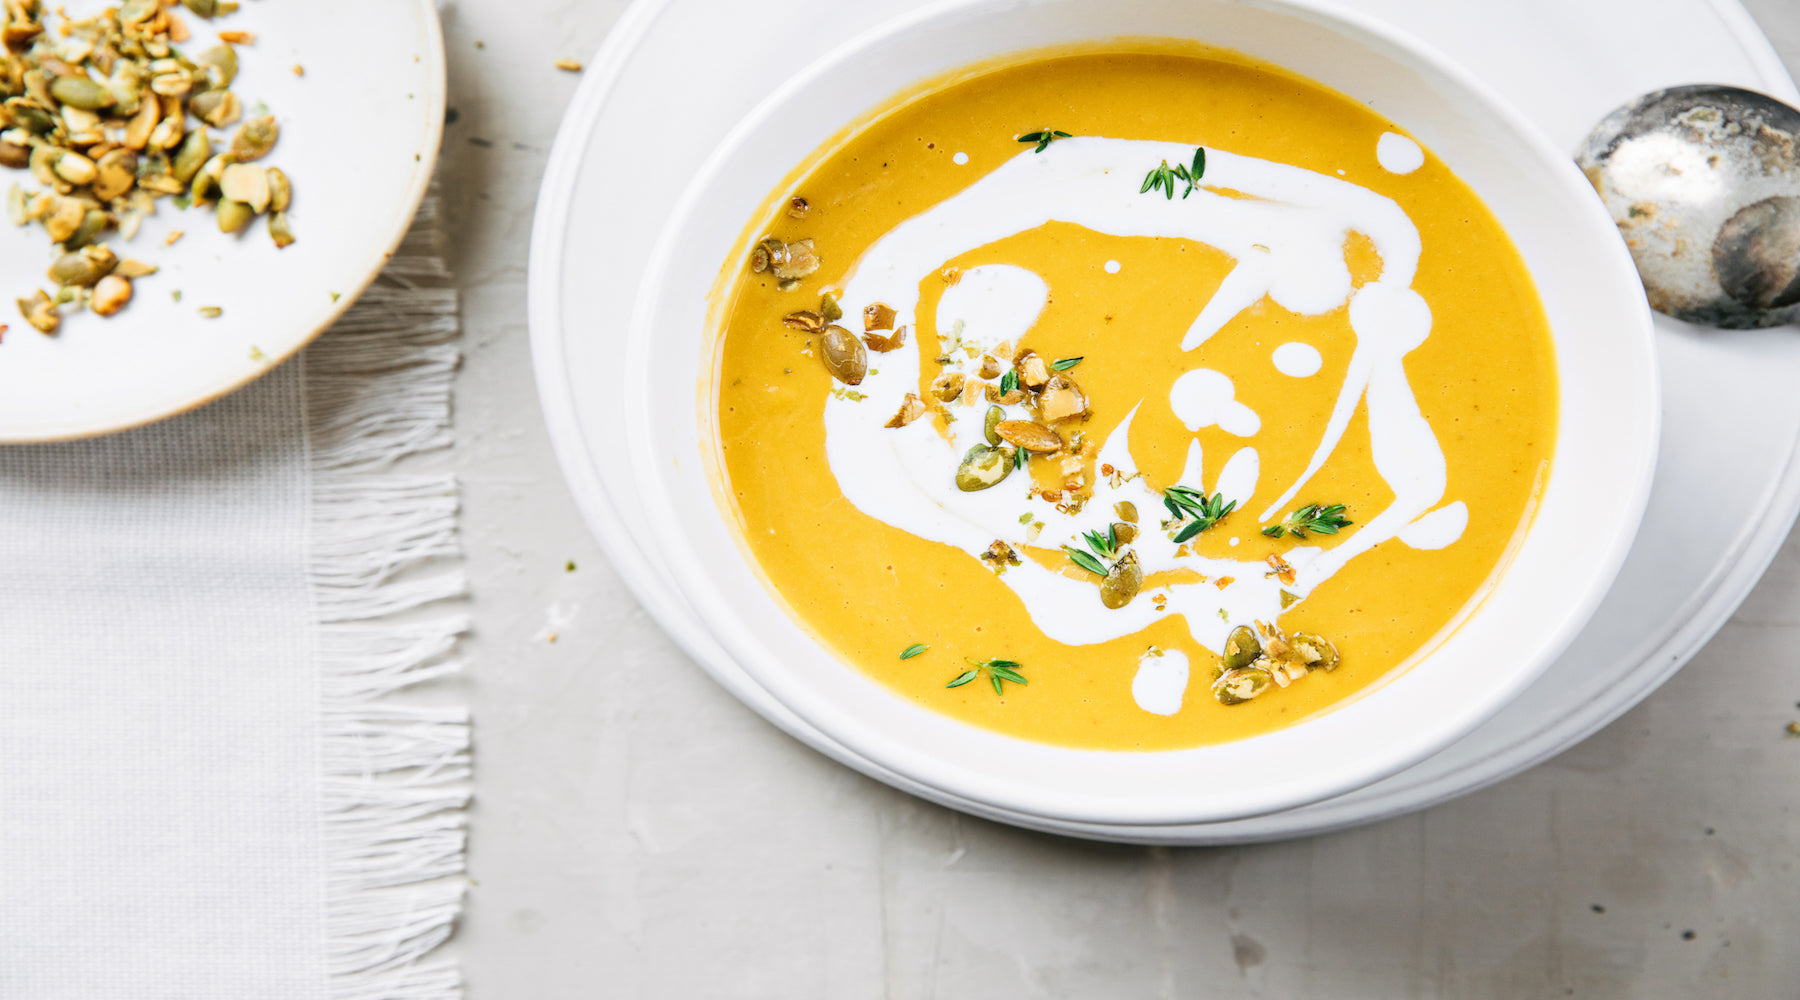 This creamy bowl of butternut squash bisque is one of our favorite fall soups.